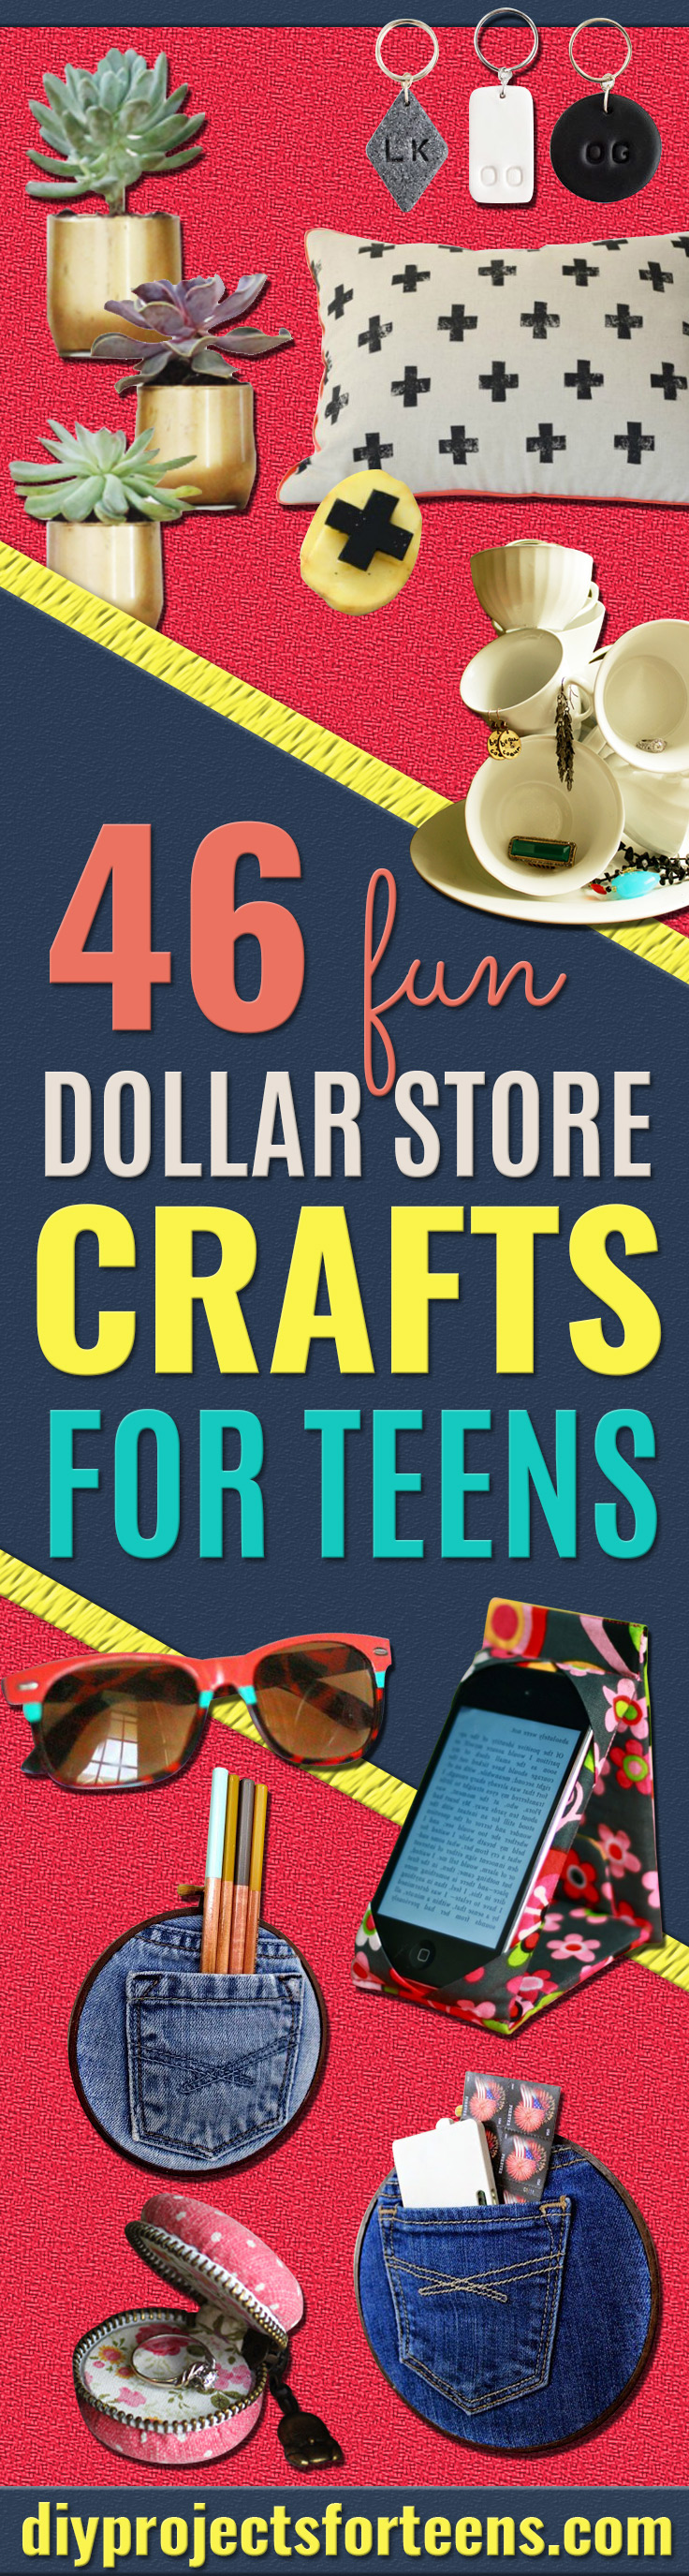 dollar store crafts for teens - cheap room decor ideas and dollar tree crafts make cool diy christmas gift for teen bedroom